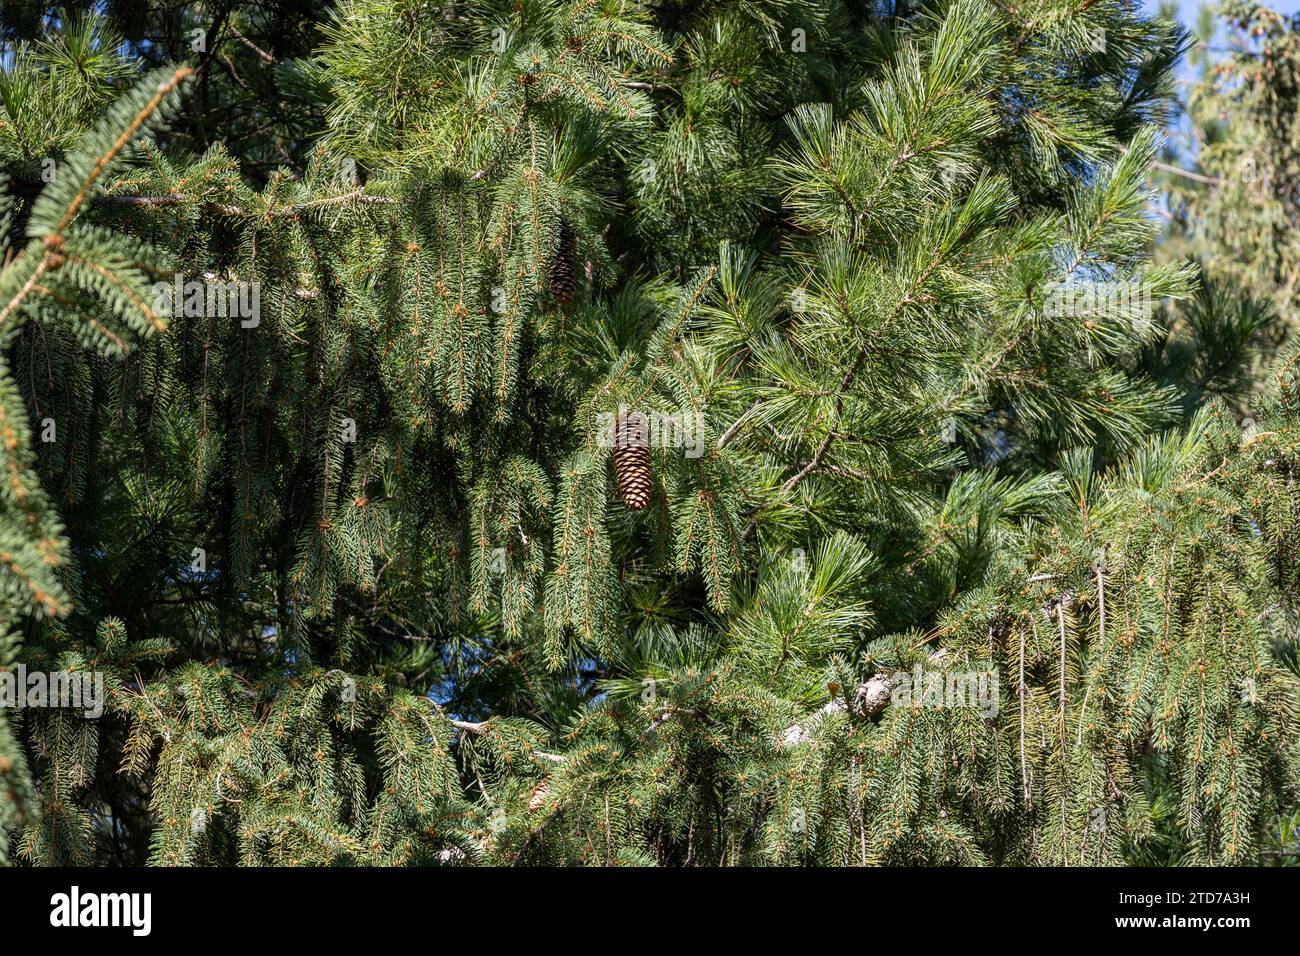 Full frame texture background of weeping white spruce (picea glauca pendula) tree branches on a sunny day Stock Photo